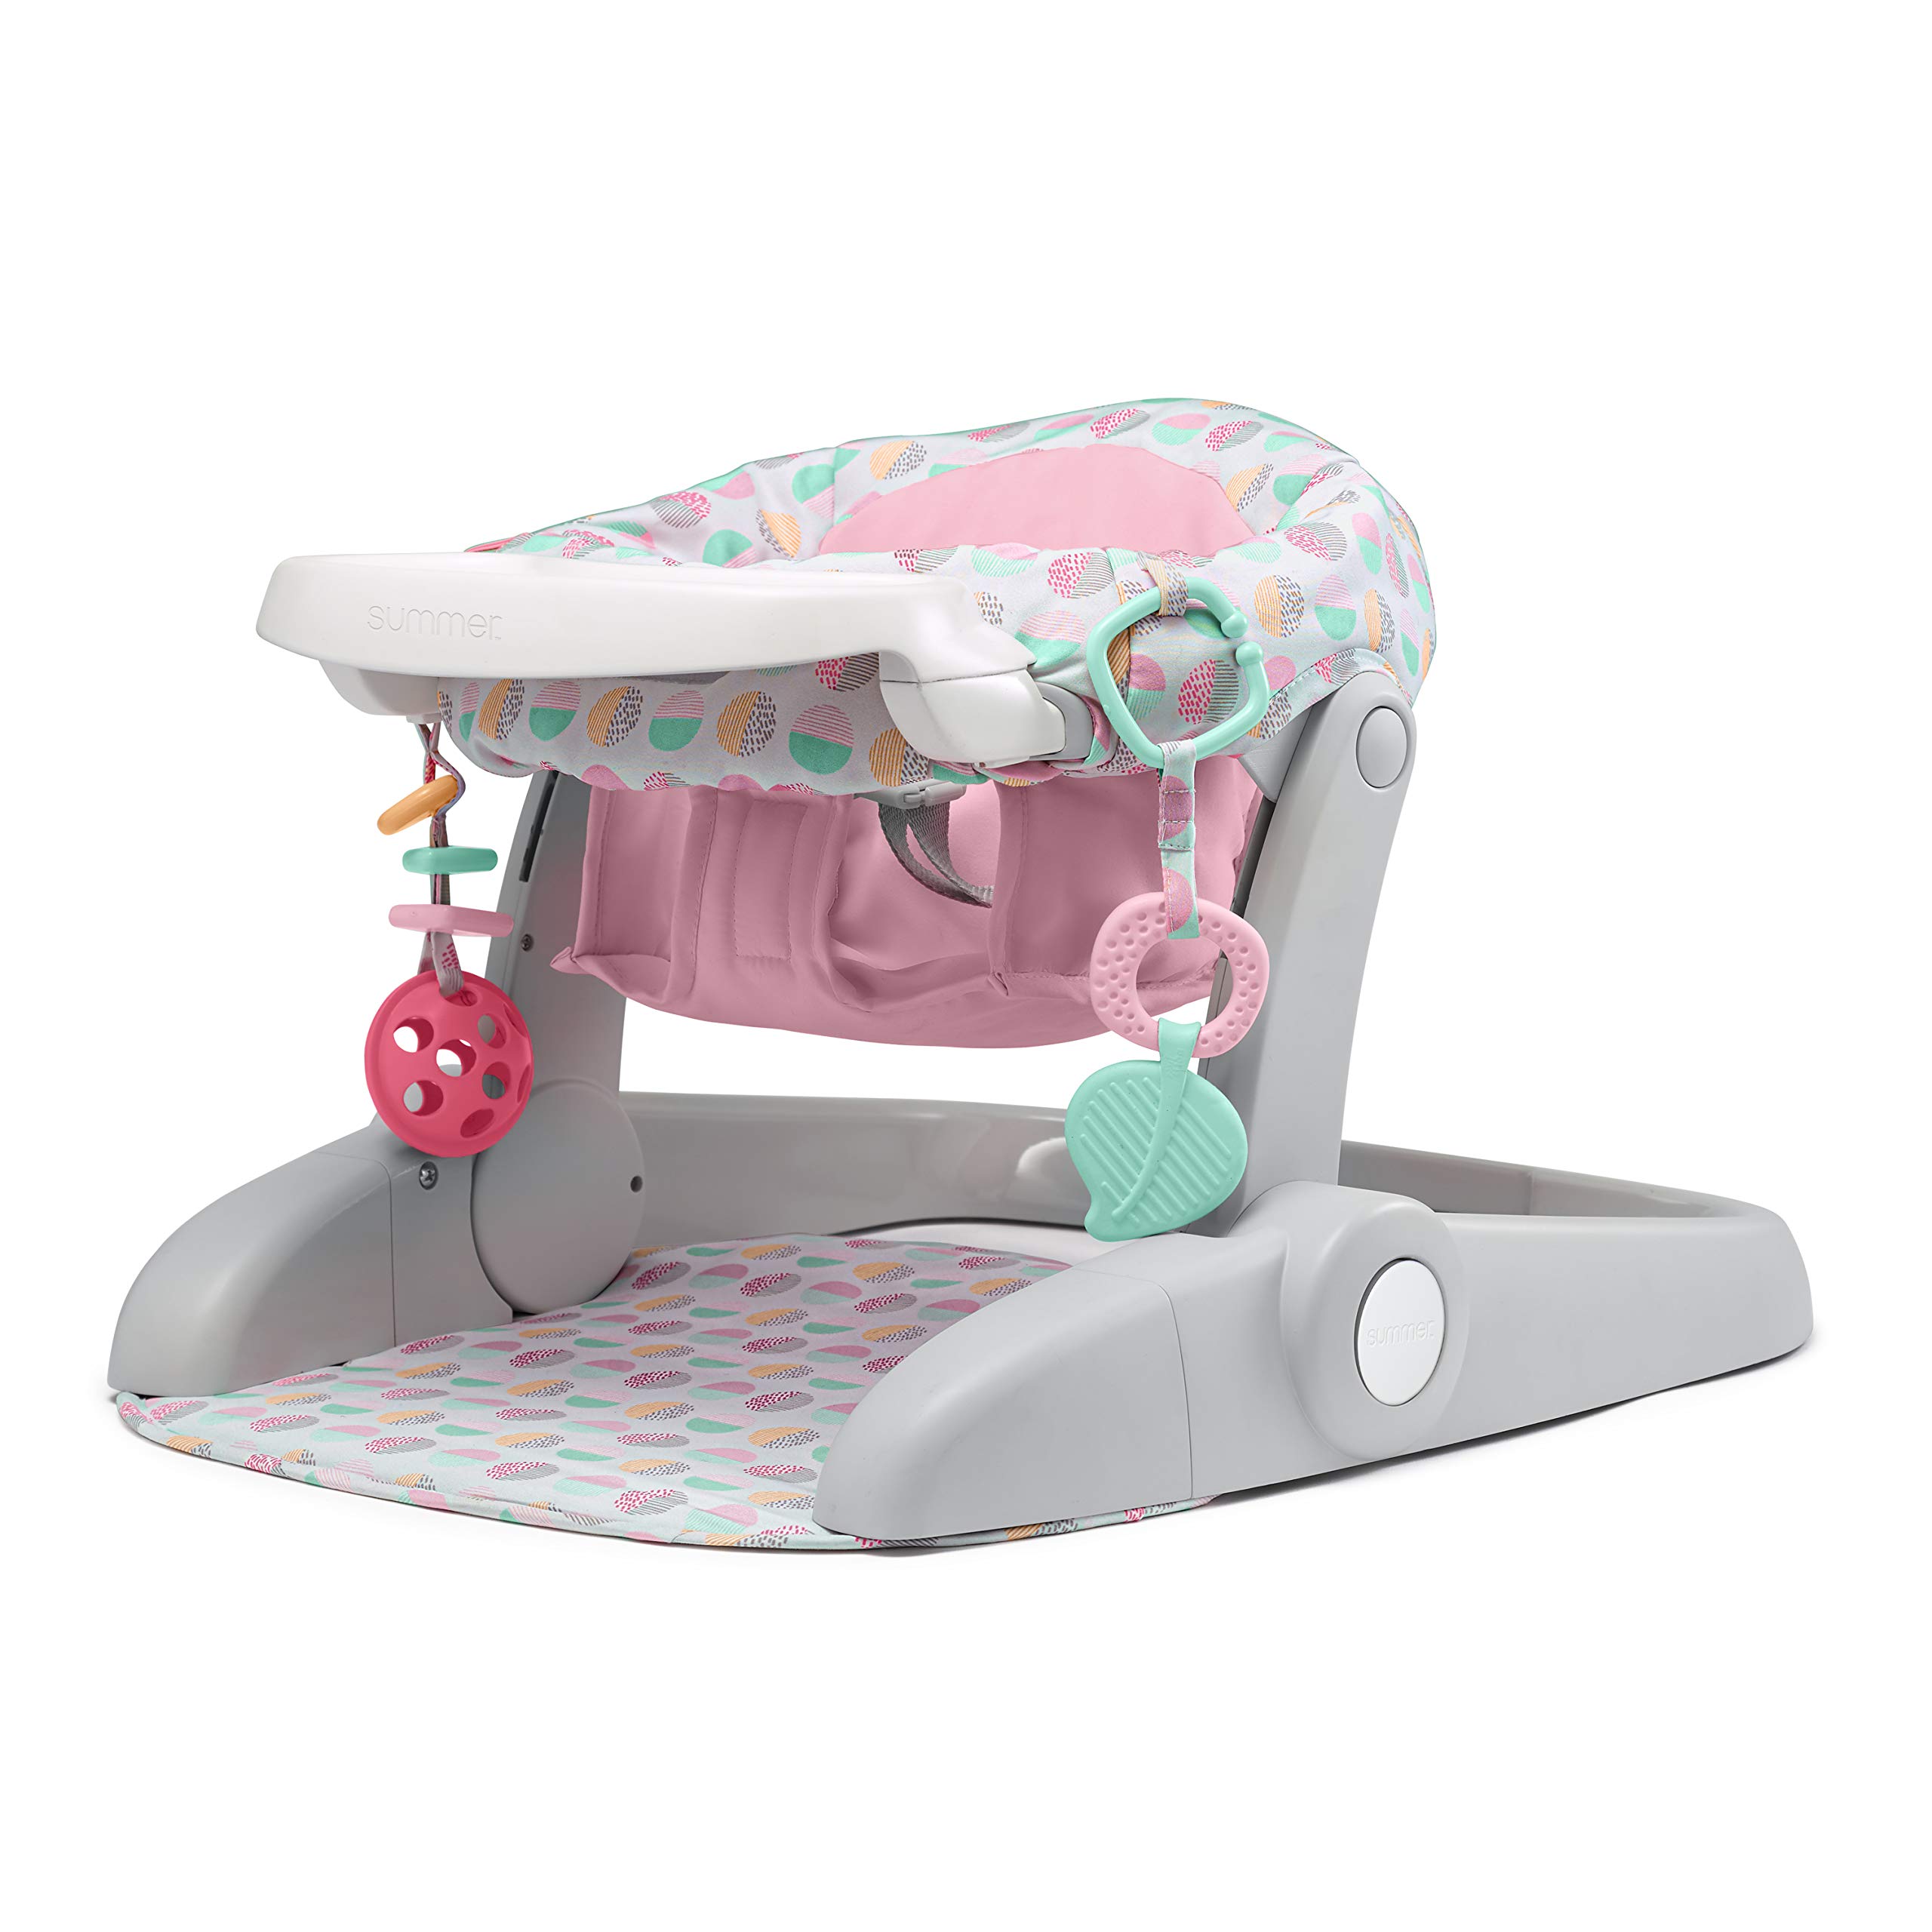 Summer Infant Summer Learn-to-Sit Stages 3-Position Floor Seat, Sweet-and-Sour Pink - Sit Baby Up to See The World - Baby Activity Seat is Adj